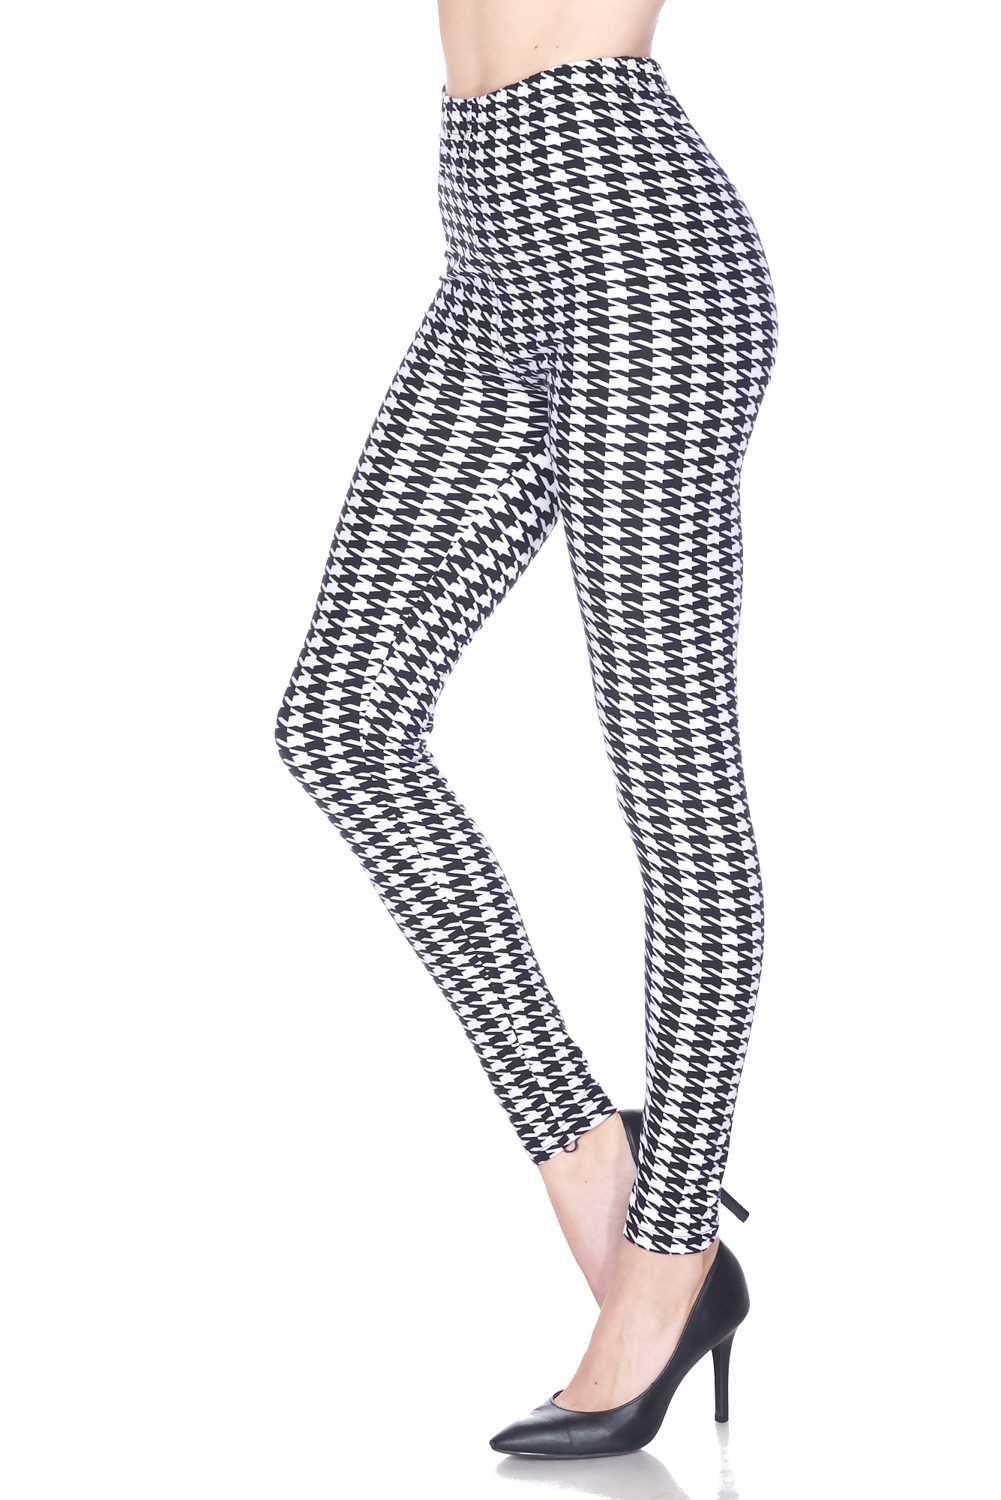 Brushed Hounds-tooth Print Ankle Leggings - 3